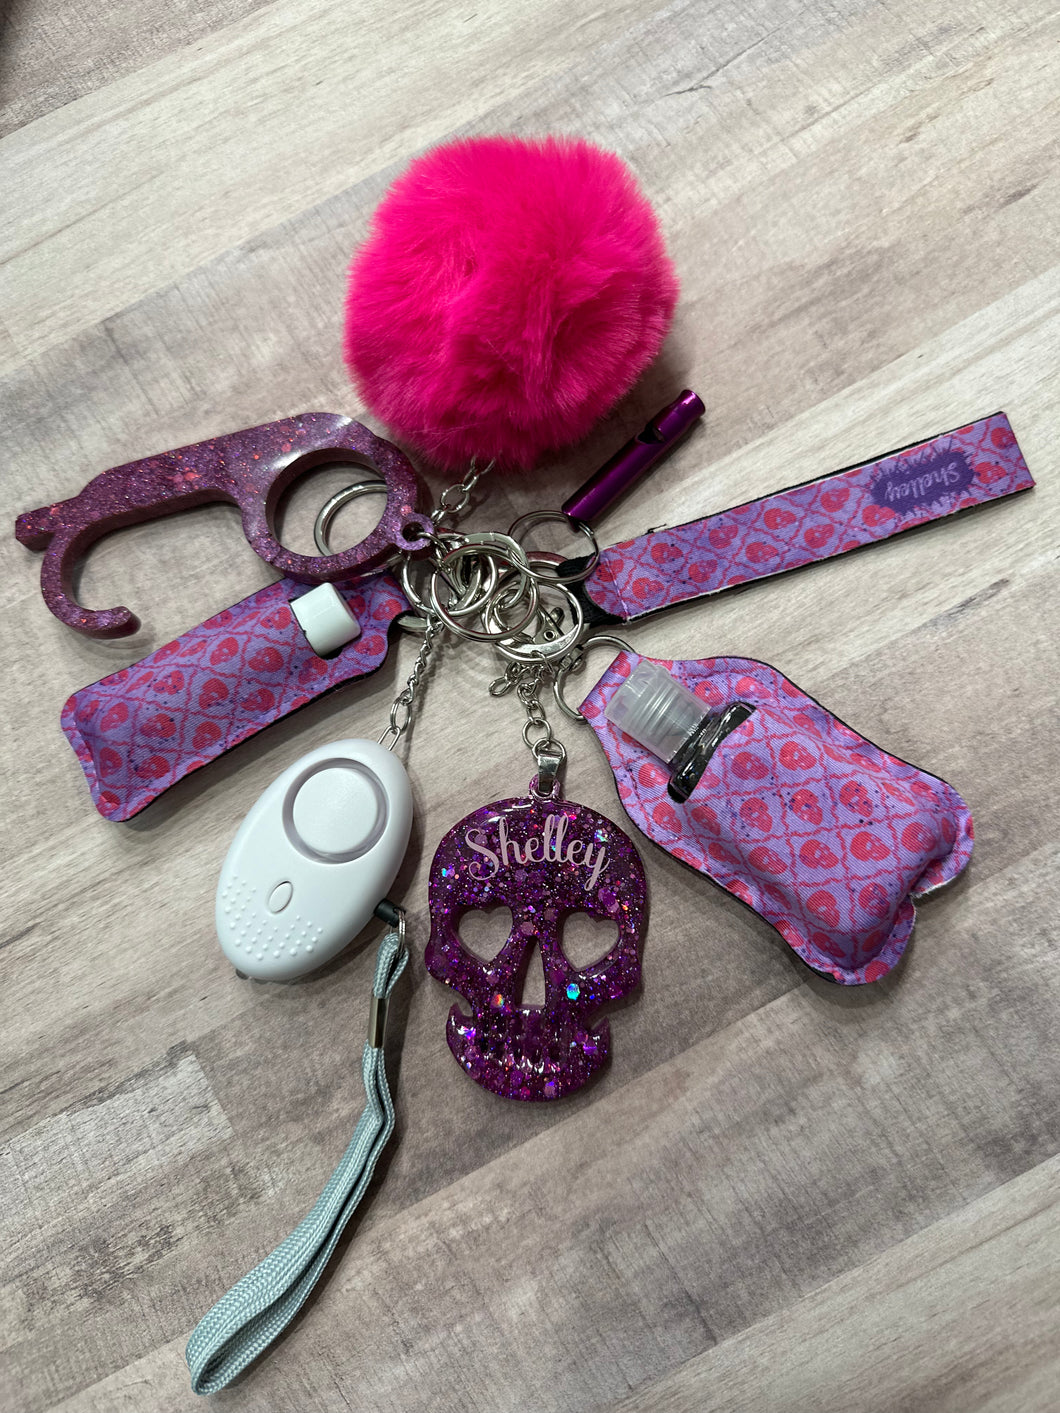 Personal Safety Keychains